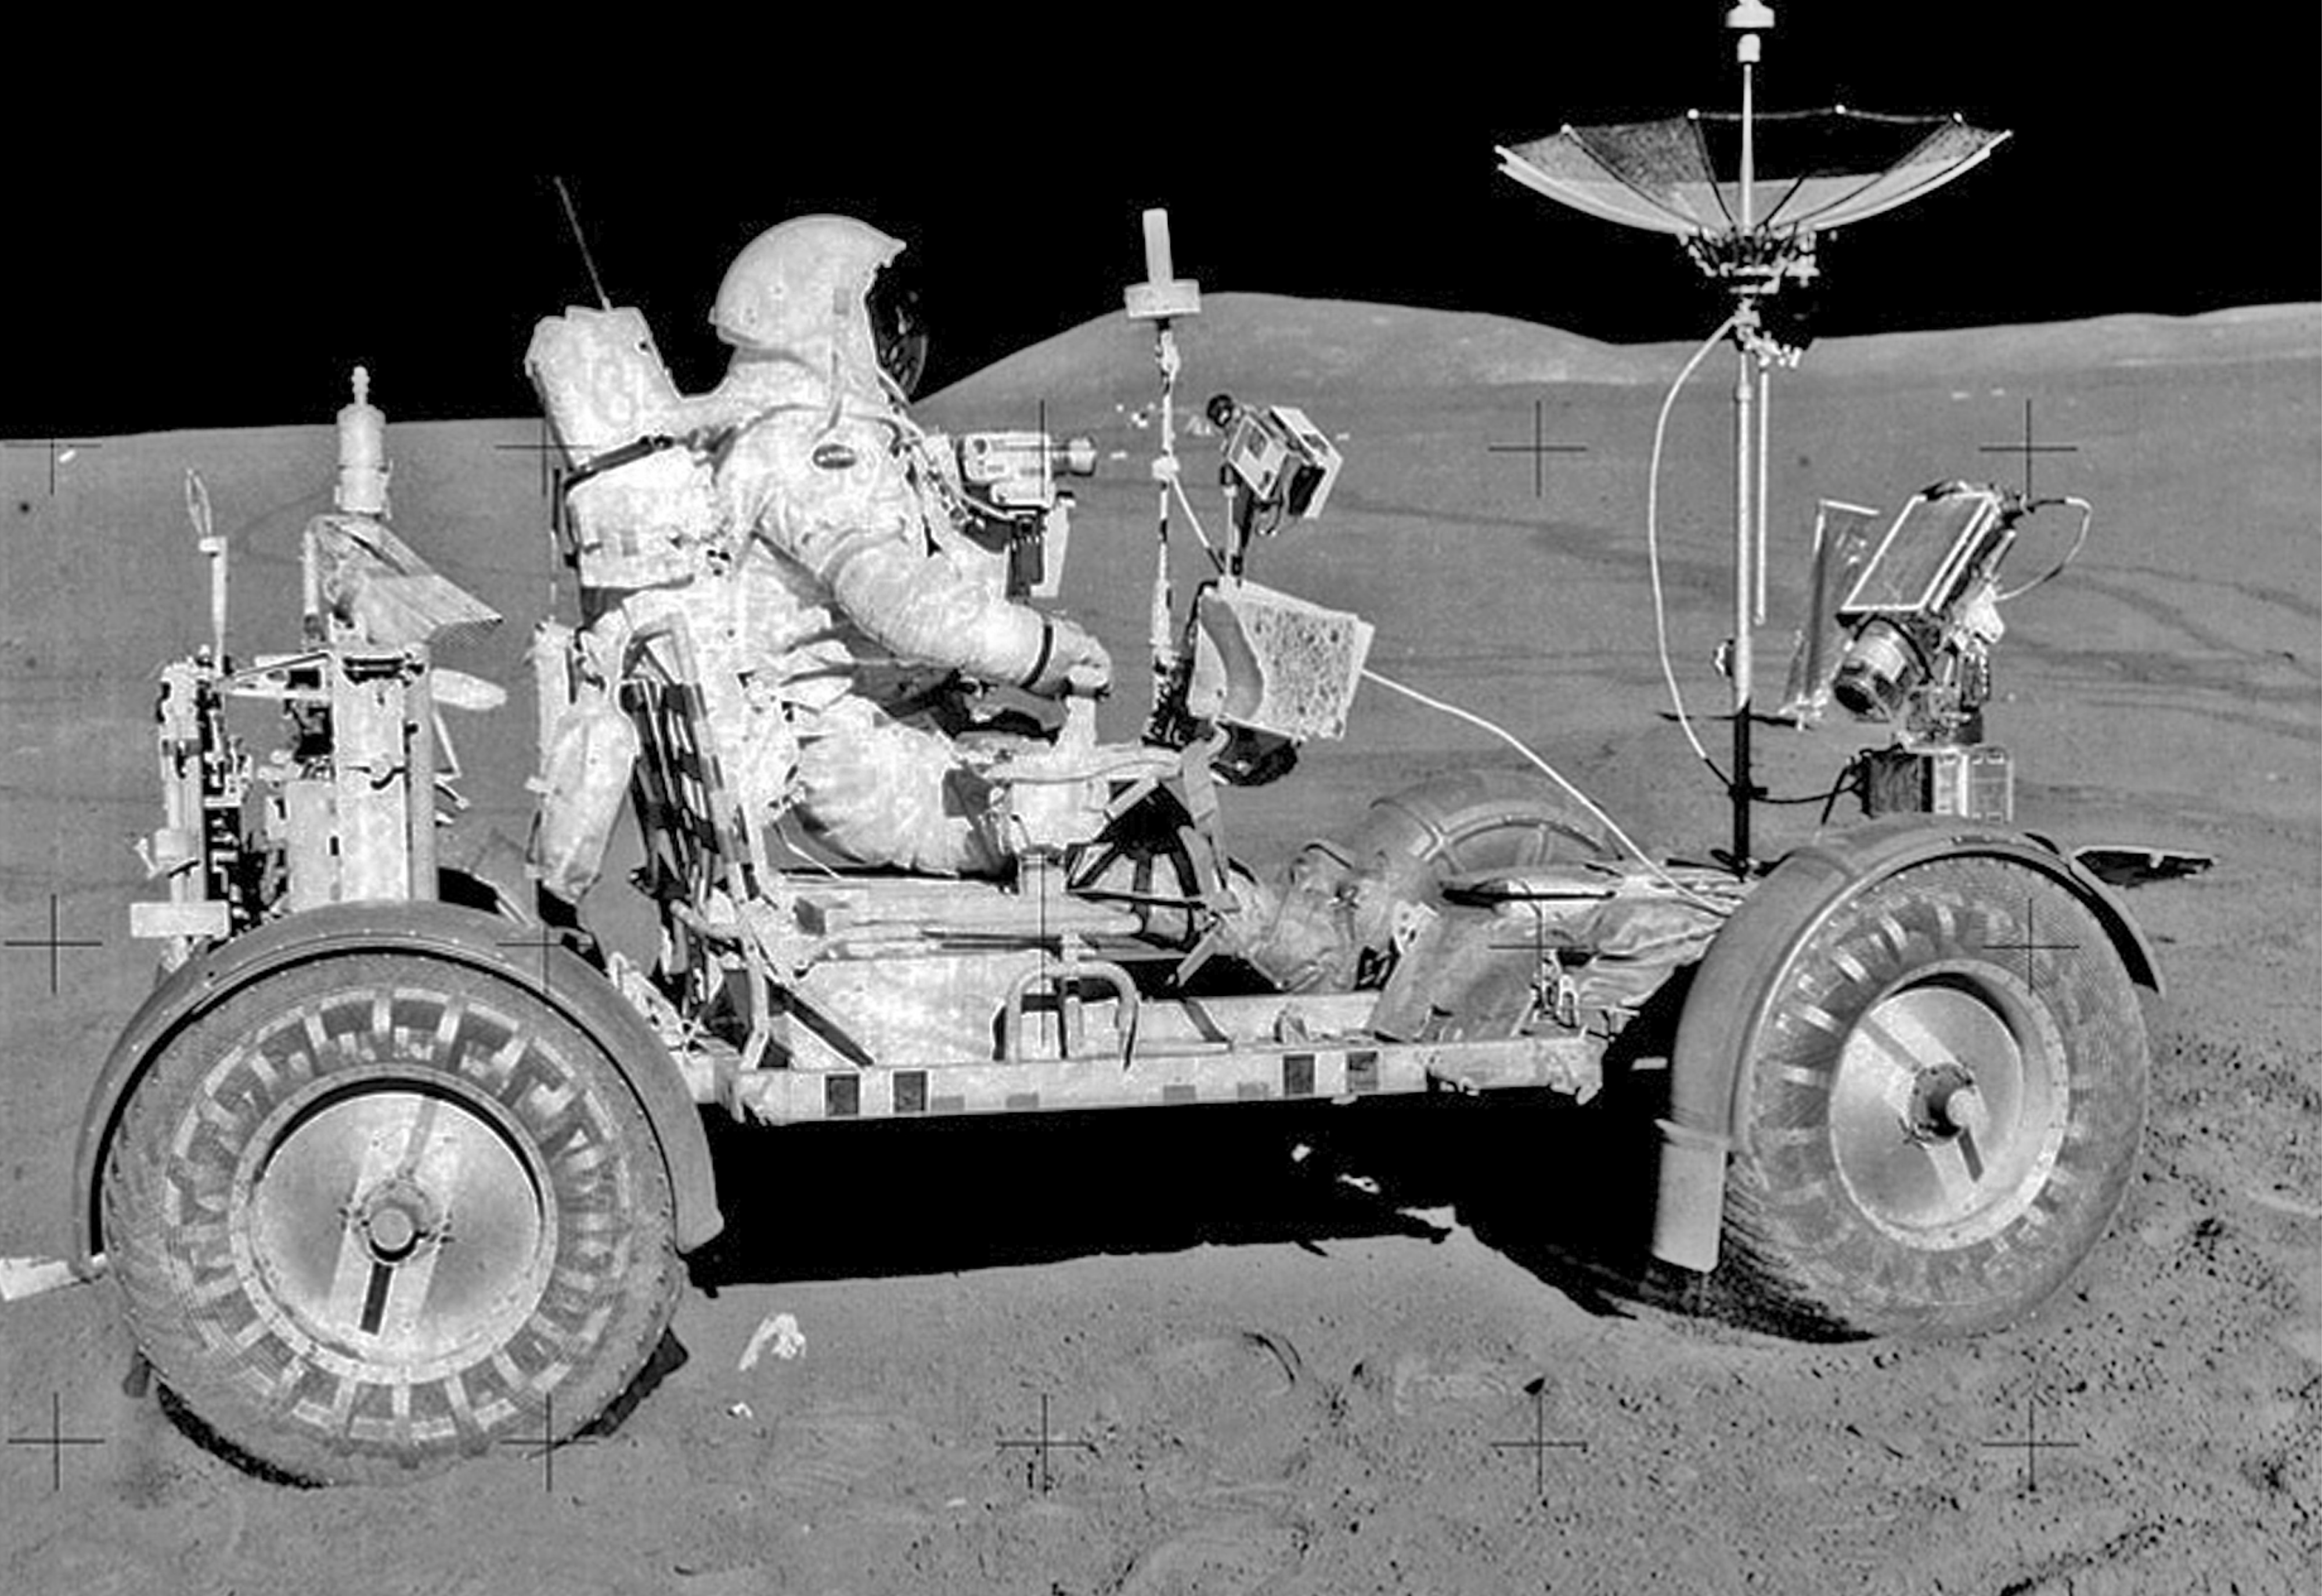 The Lunar Roving Vehicle